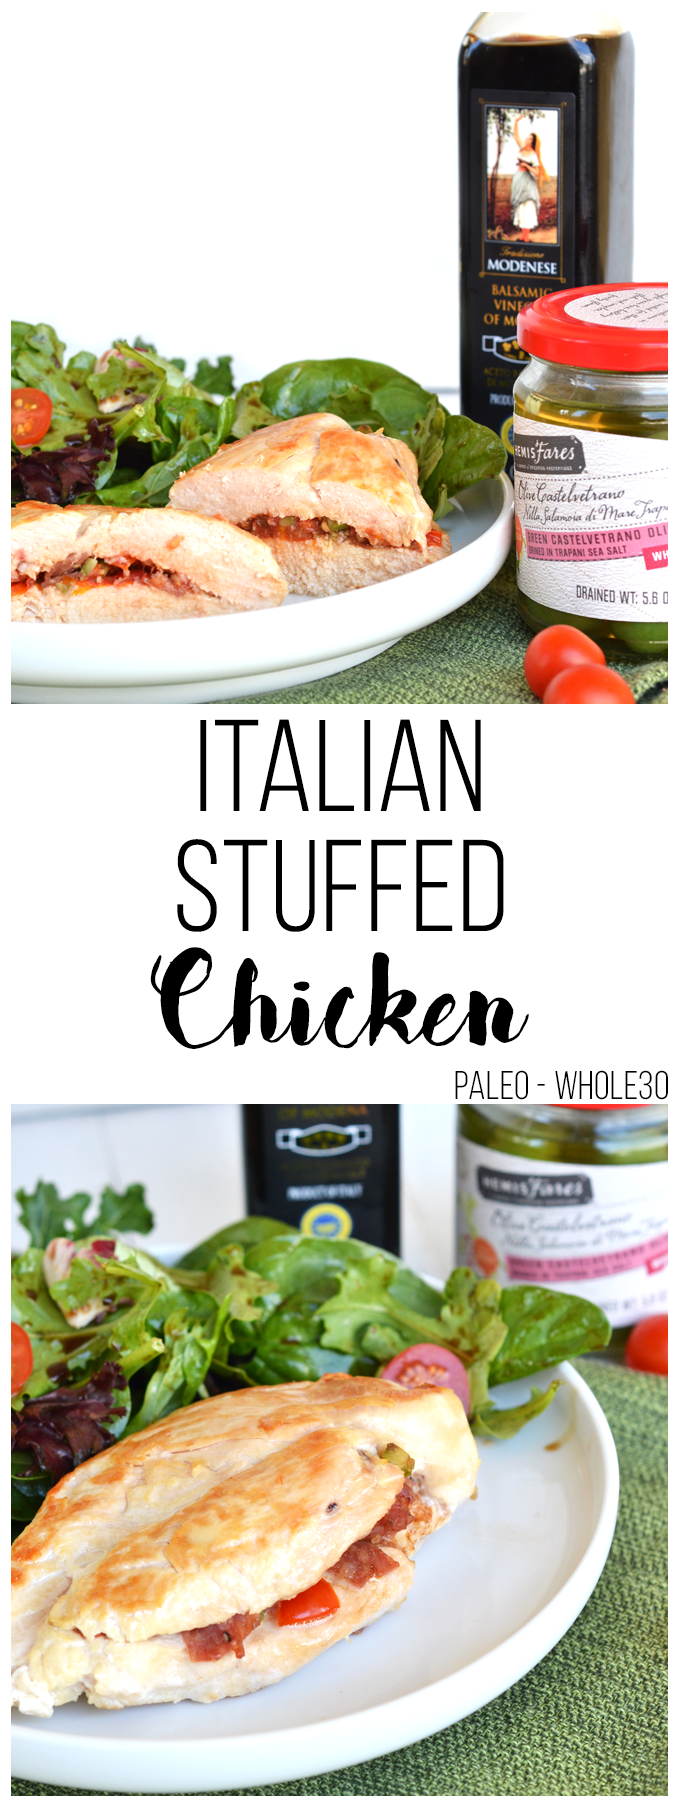 This Italian Stuffed Chicken is the perfect weeknight meal & a great way to add flavor to chicken breasts!